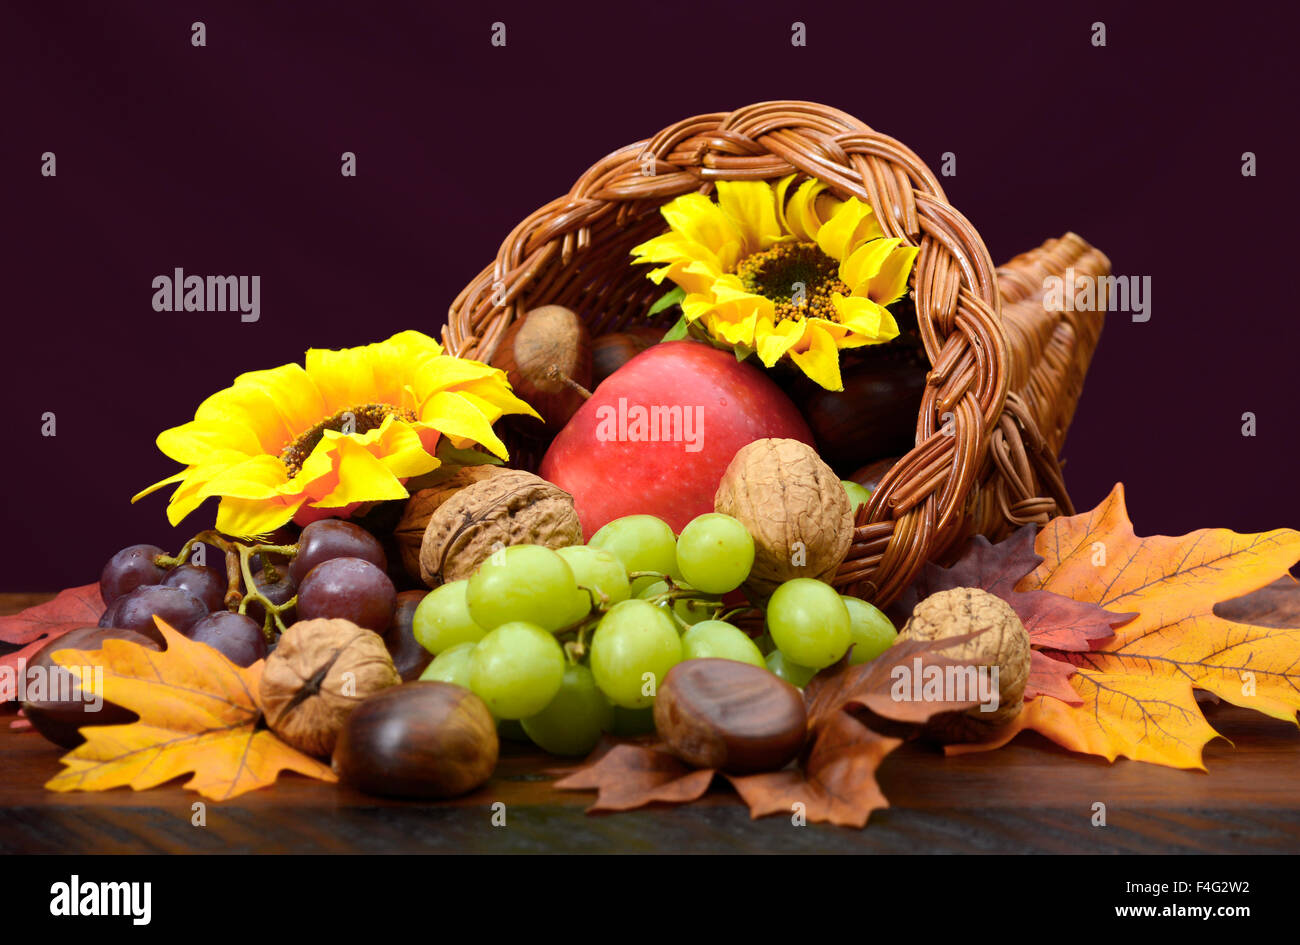 Thanksgiving cornucopia, wicker horn of plenty, centerpiece with fruit, nuts, leaves and sunflowers on dark wood table. Stock Photo